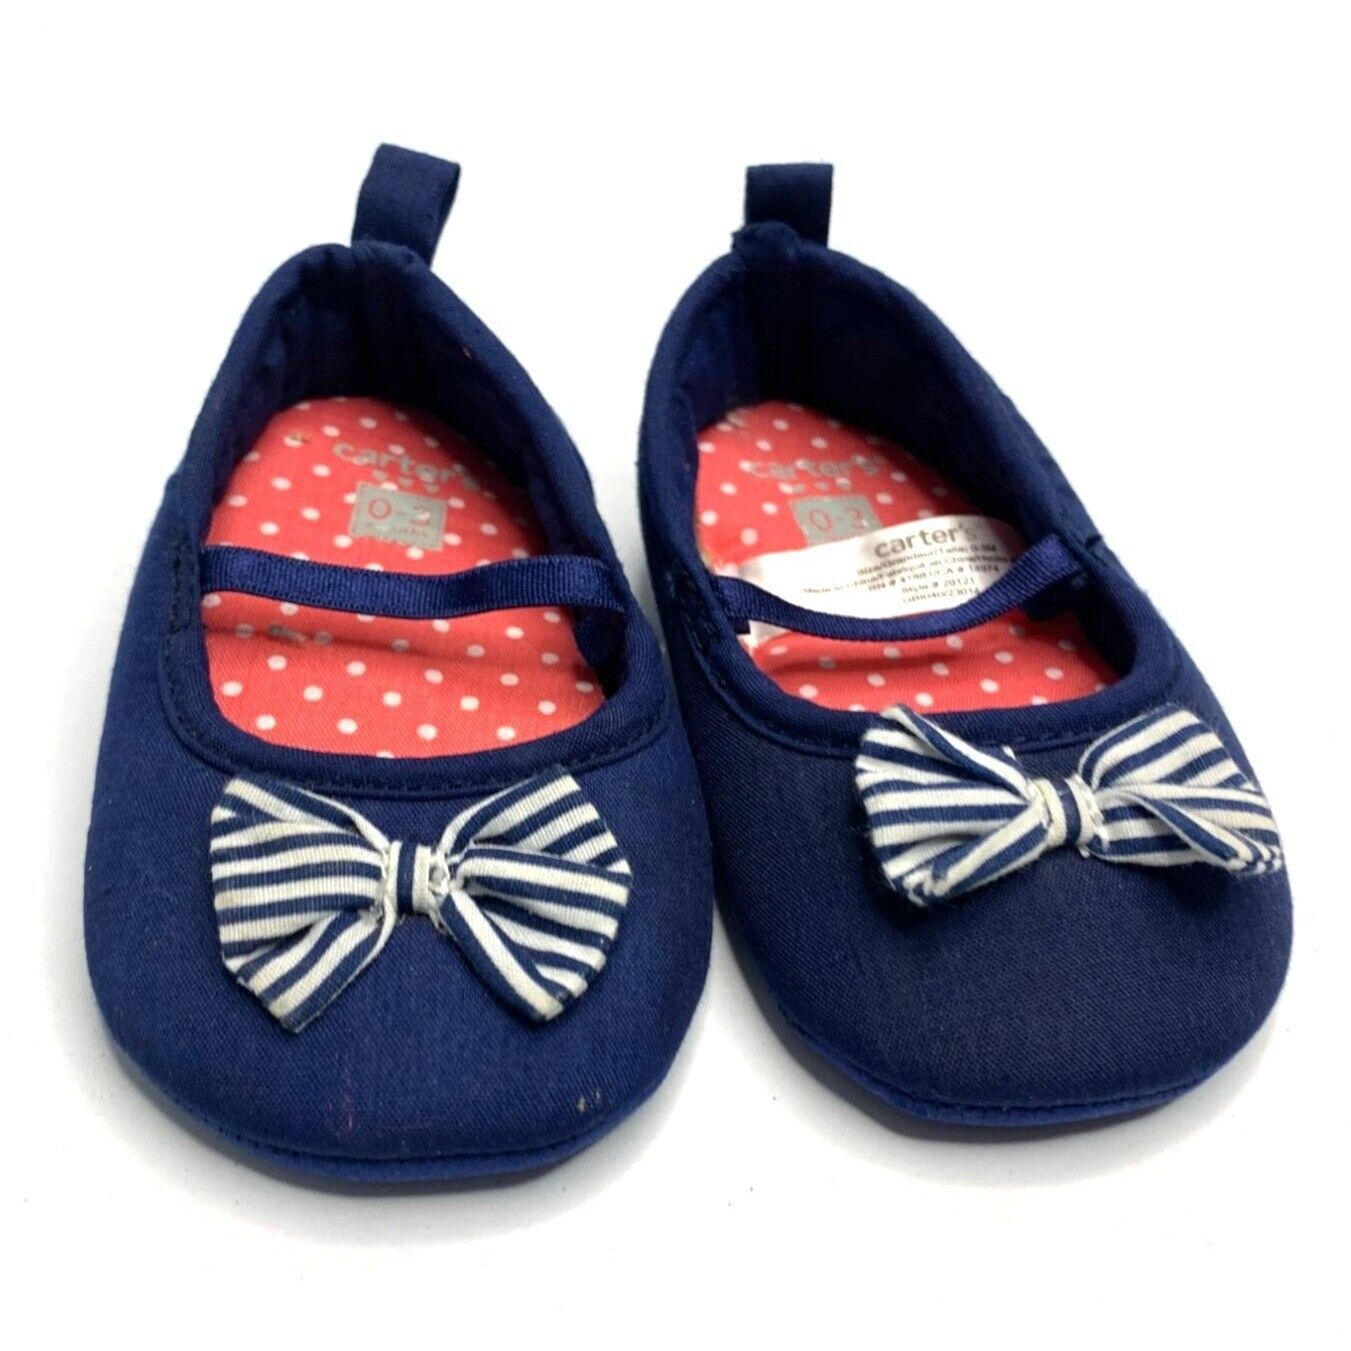 Carters Girls Infant Baby 0 3 Months Navy Blue Mary Jane Flat Shoes Slip On Shoe - $10.88